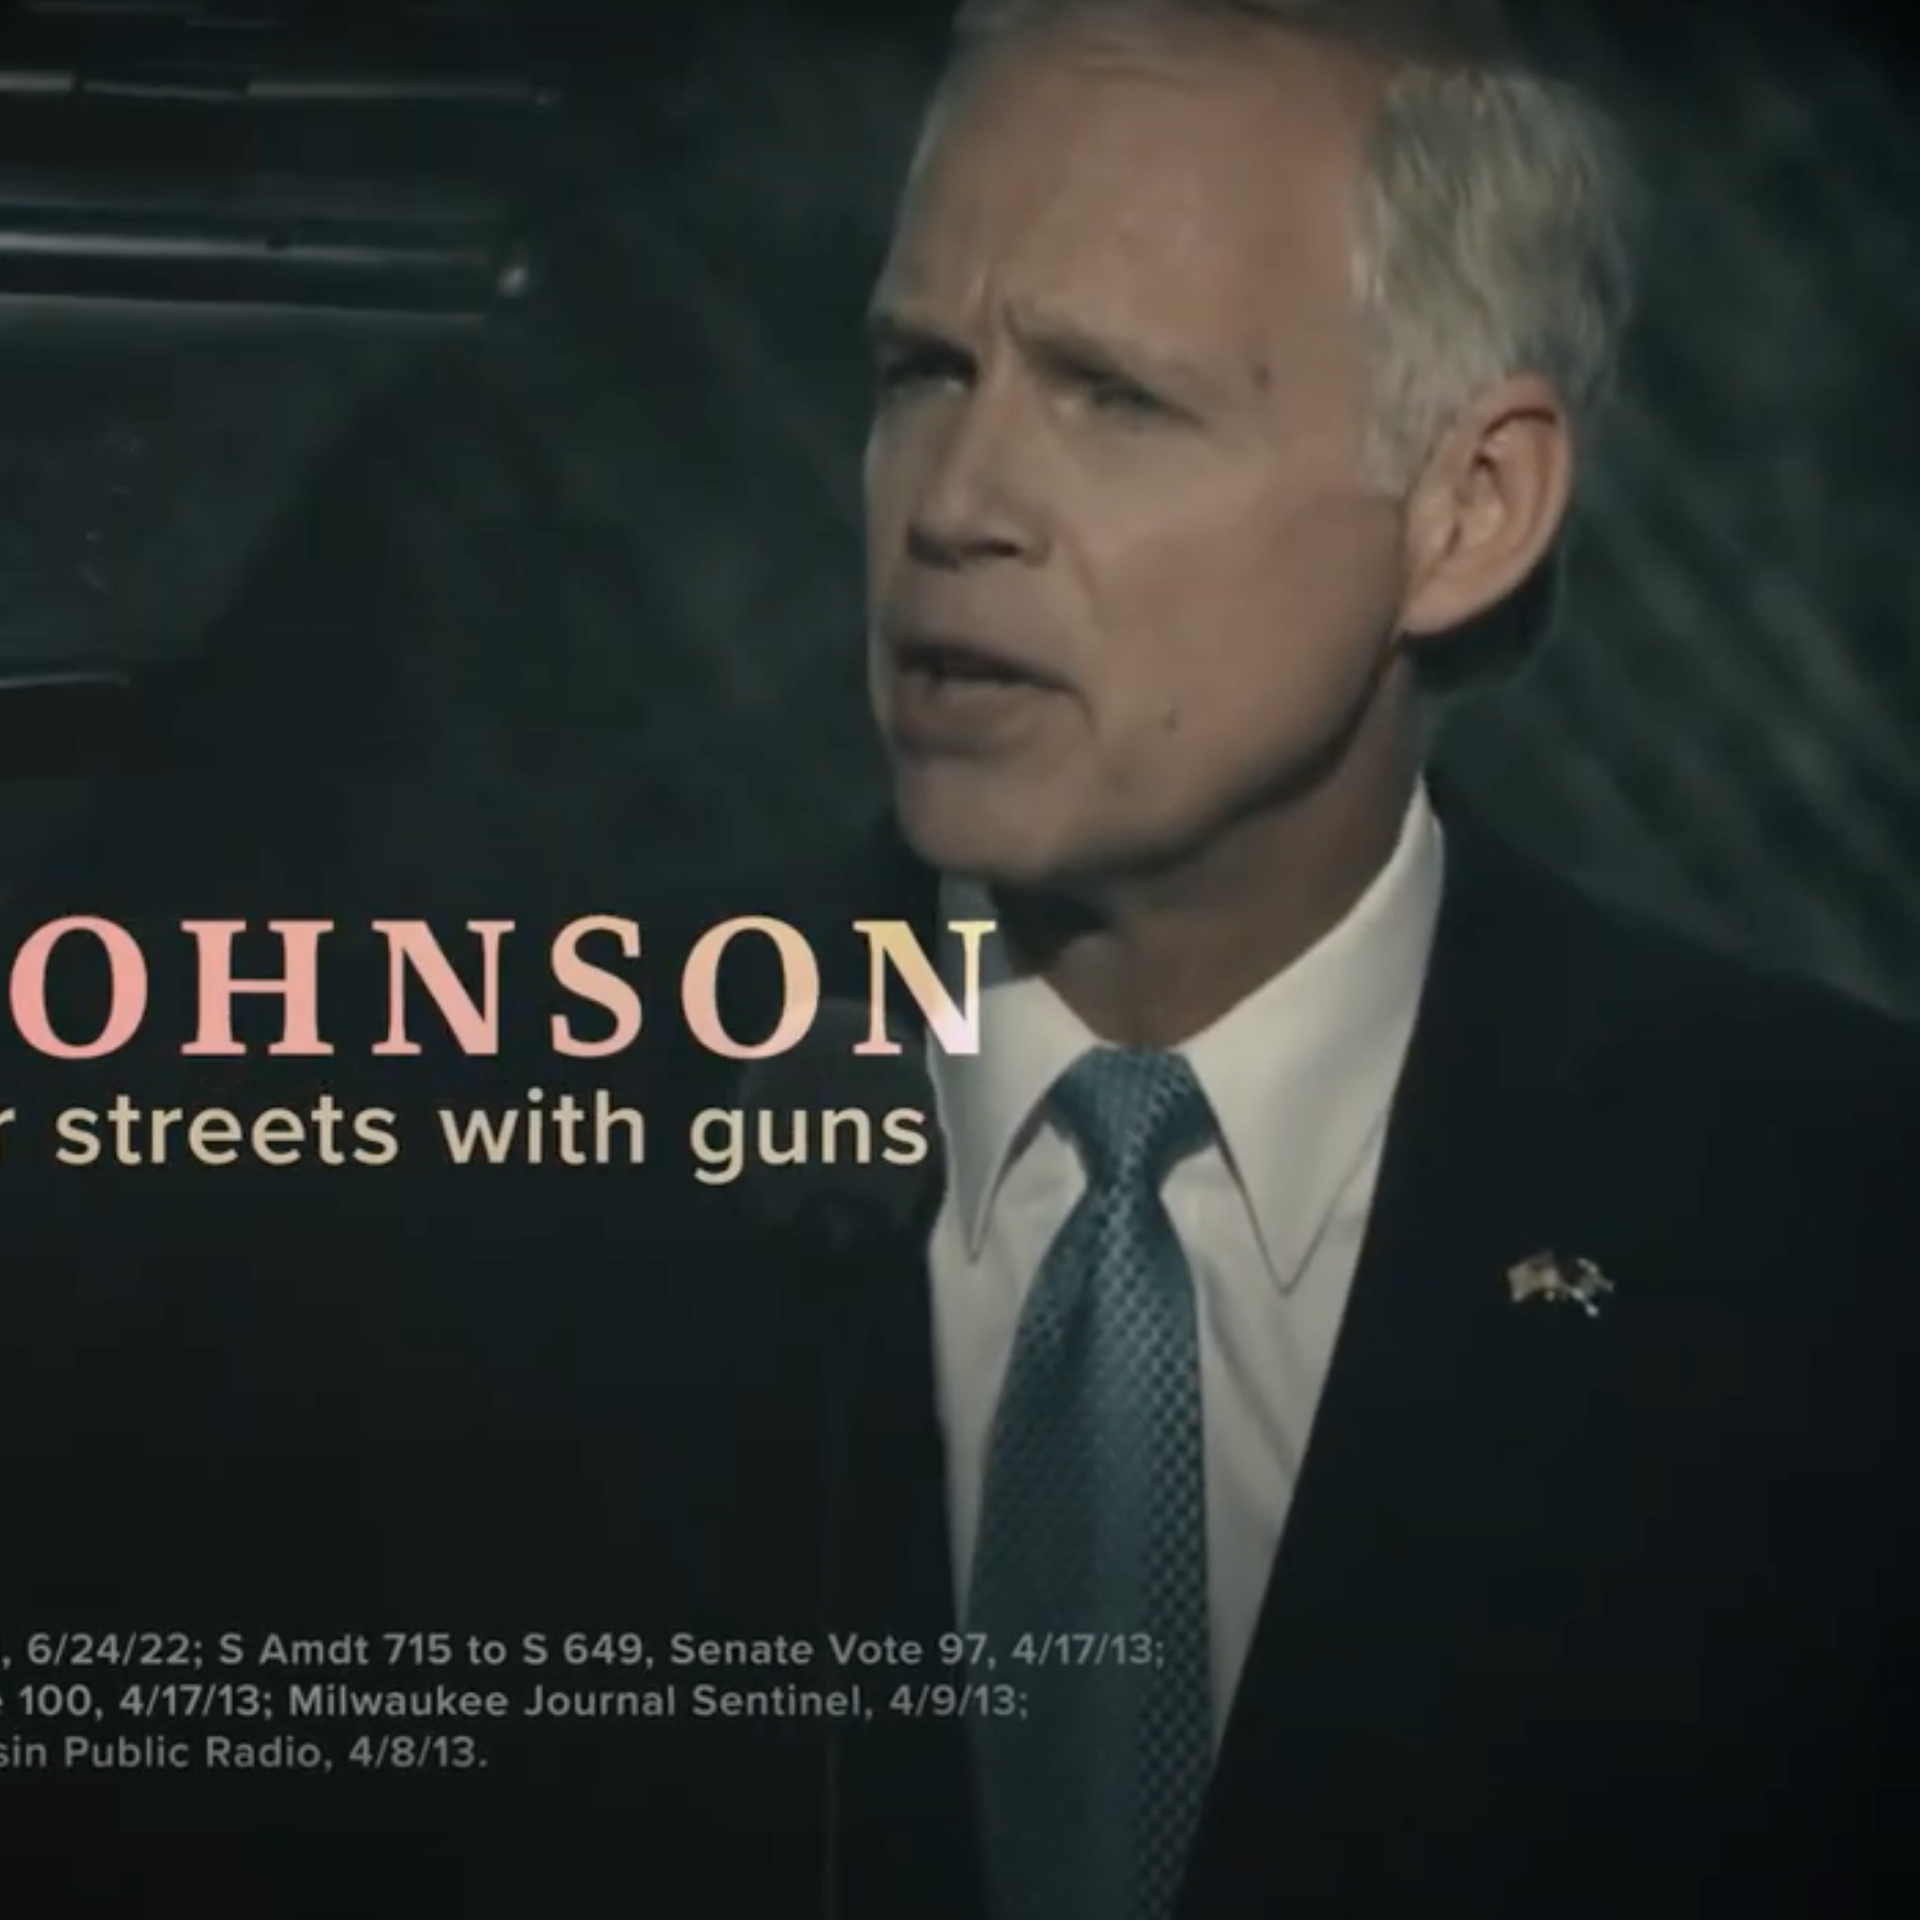 Senate Democrats release first TV attack ad against Johnson in Wisconsin